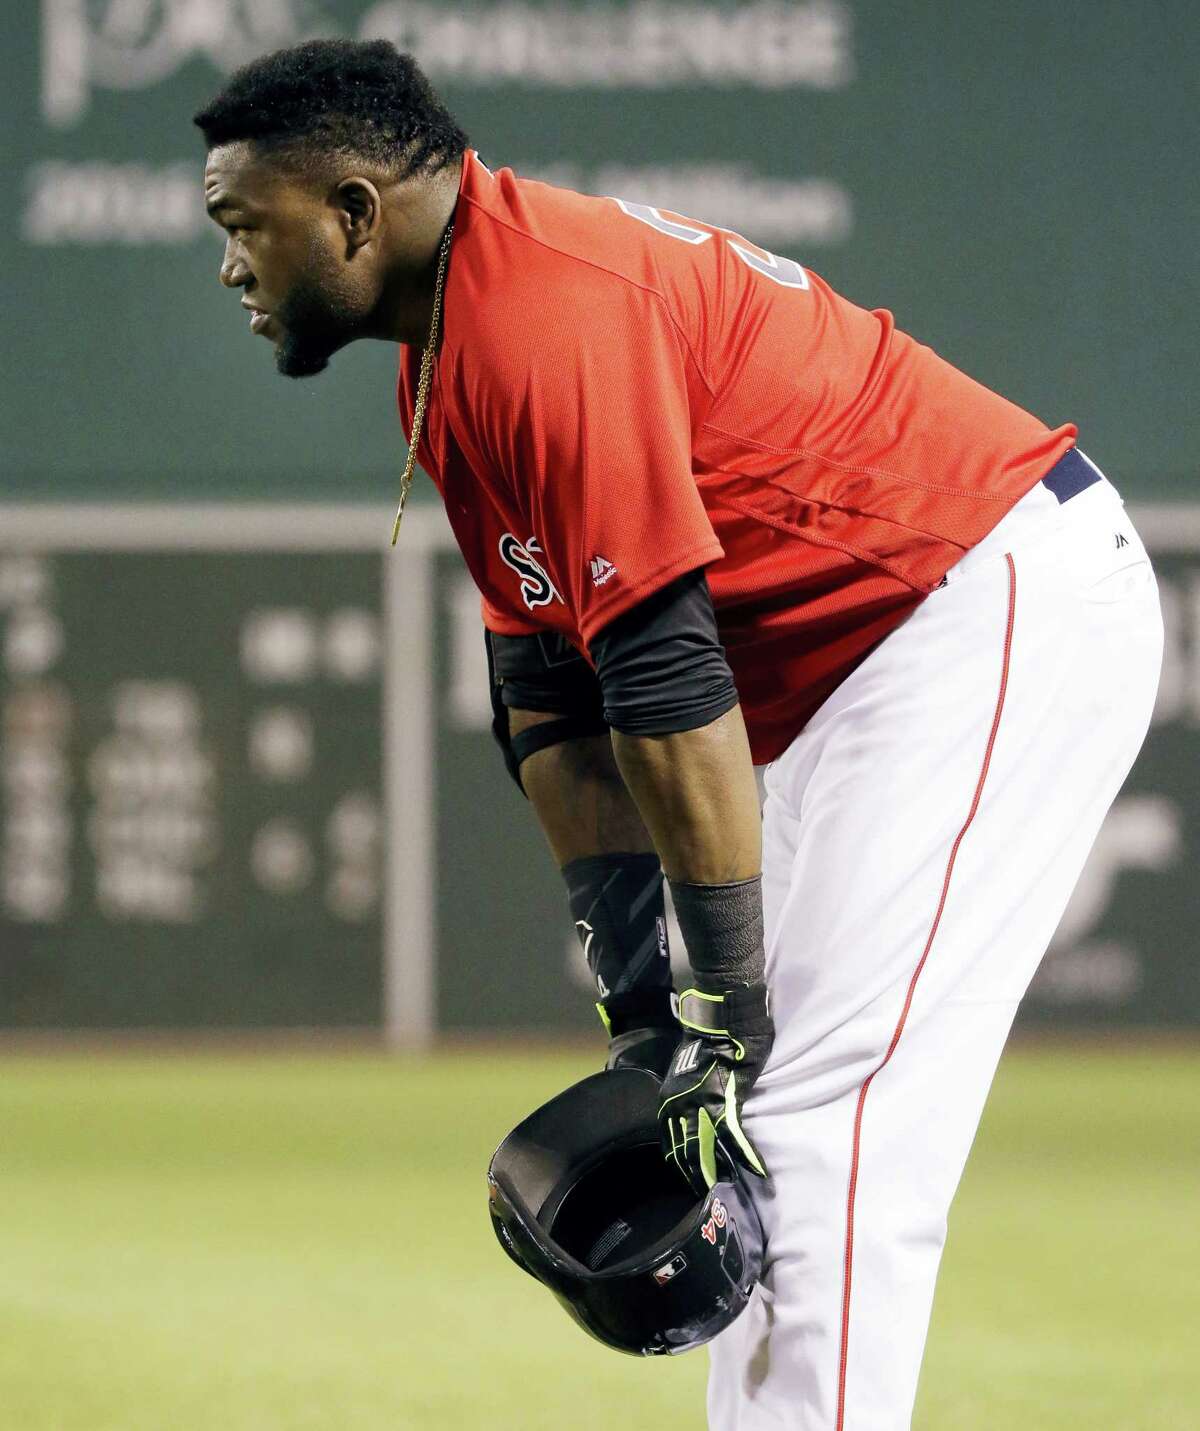 David Ortiz reacts after hitting into a double play in the ninth inning on Friday.